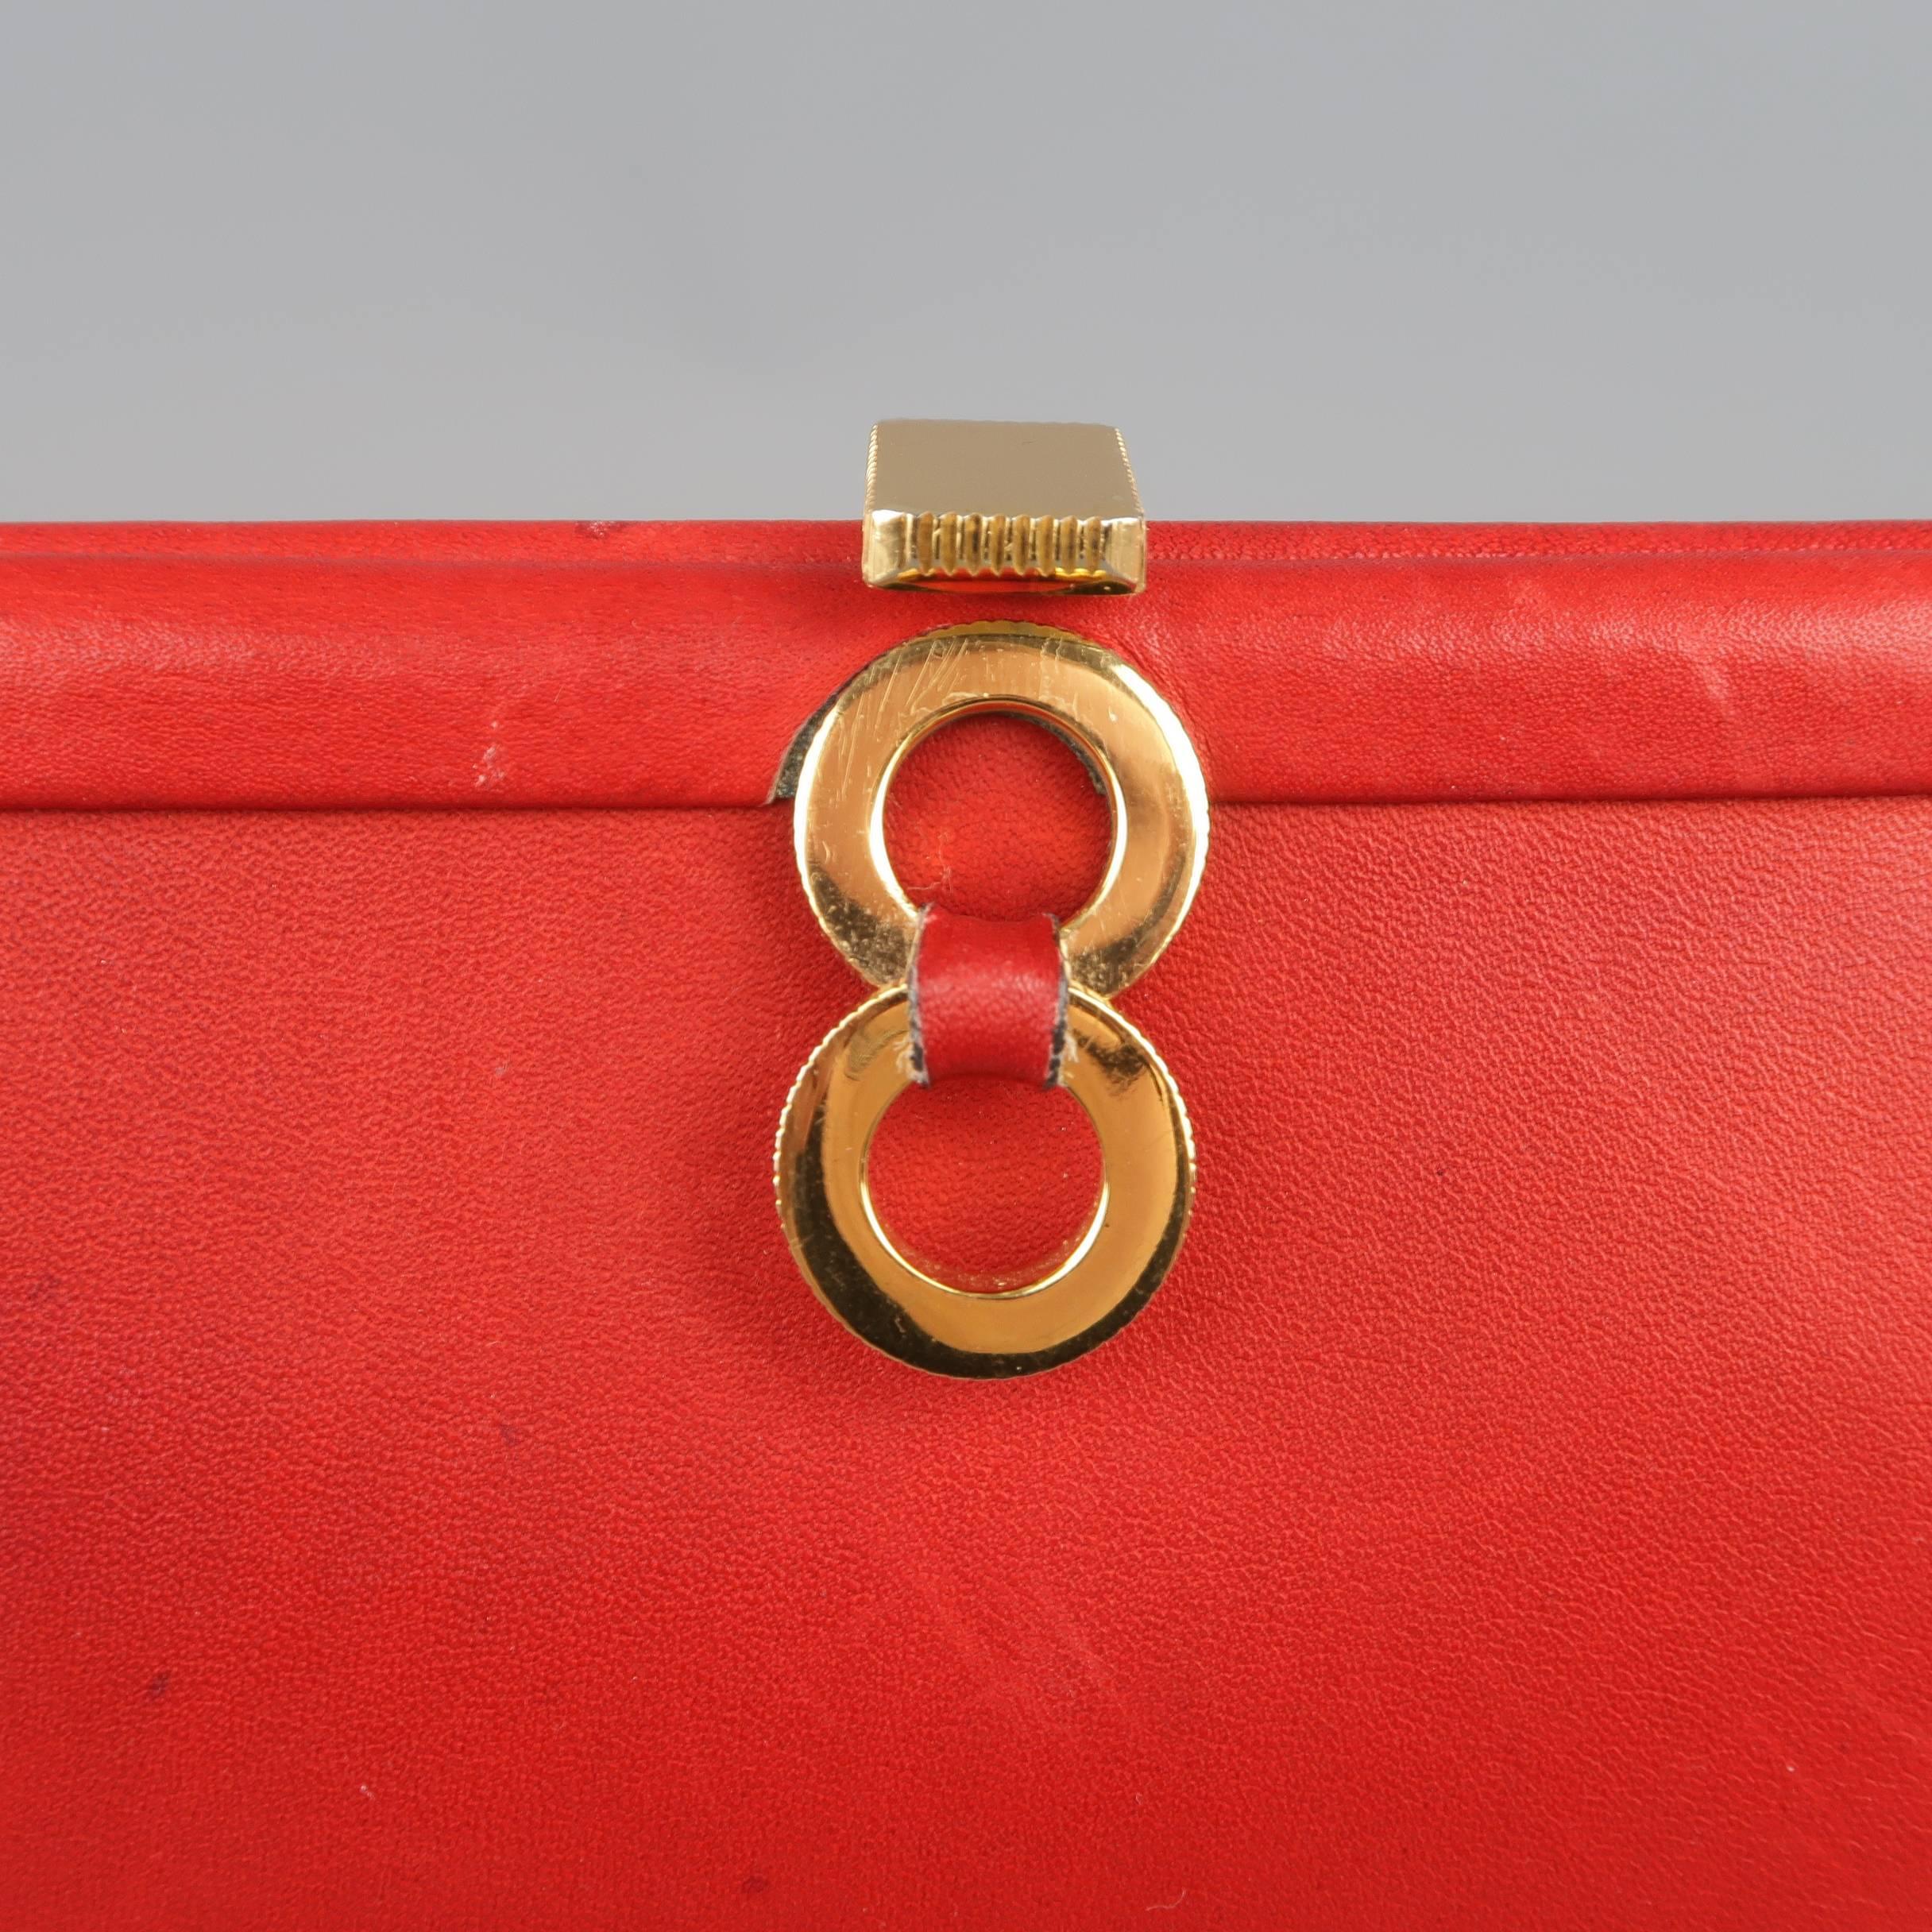 Vintage LOEWE purse comes in red leather and features yellow gold tone hoop adornment and clasp closure. Wear throughout. As-Is.
 
Fair Pre-Owned Condition.
 
Length: 5.75 in.
Width: 1 in.
Height: 4.25 in.

SKU: 85473